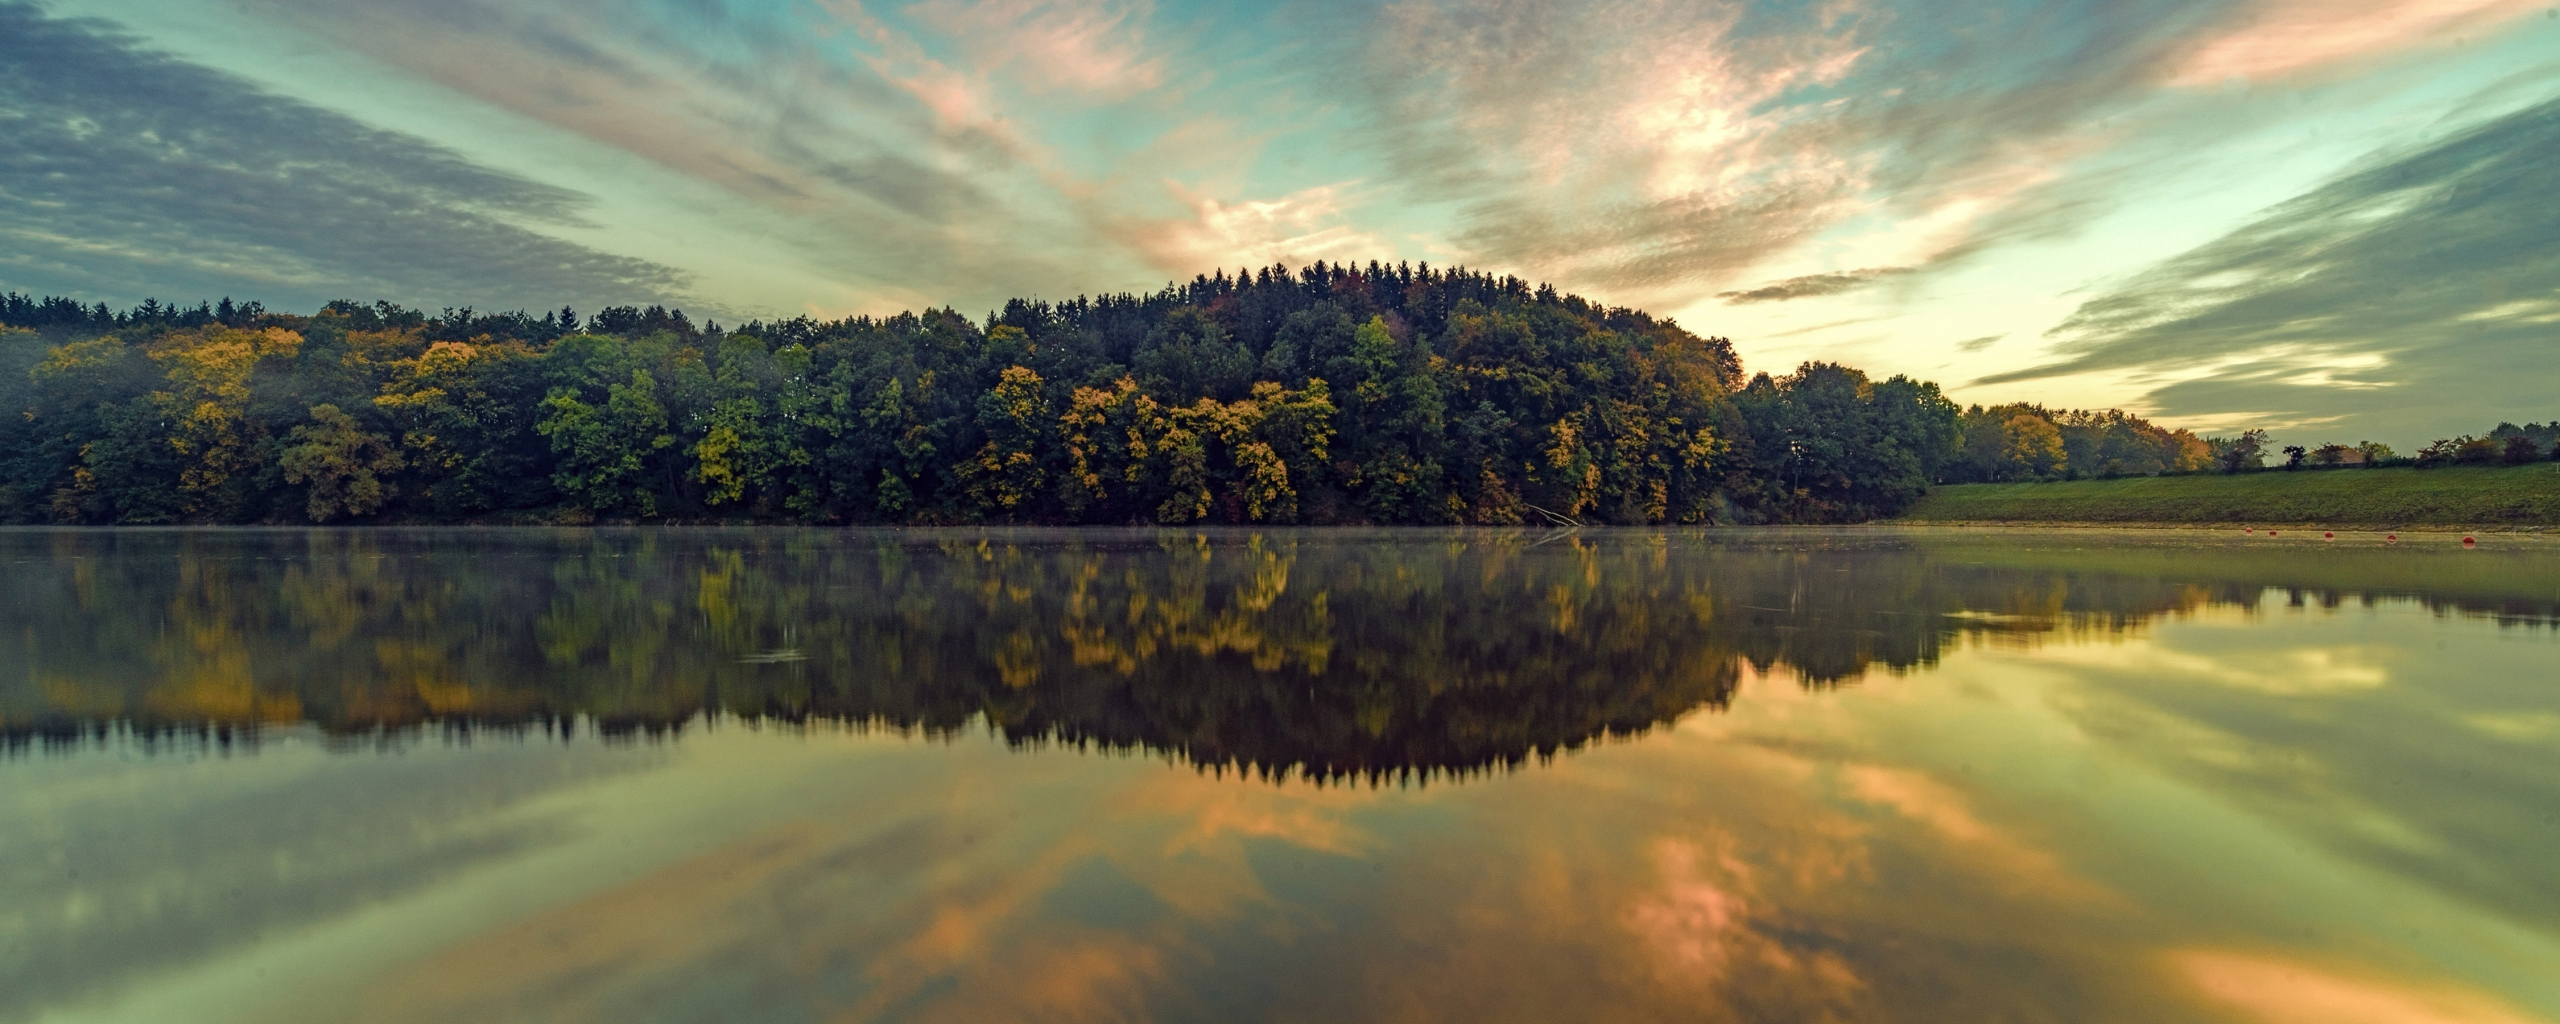 Download wallpaper 2560x1024 trees, sky, lake, reflections, nature ...